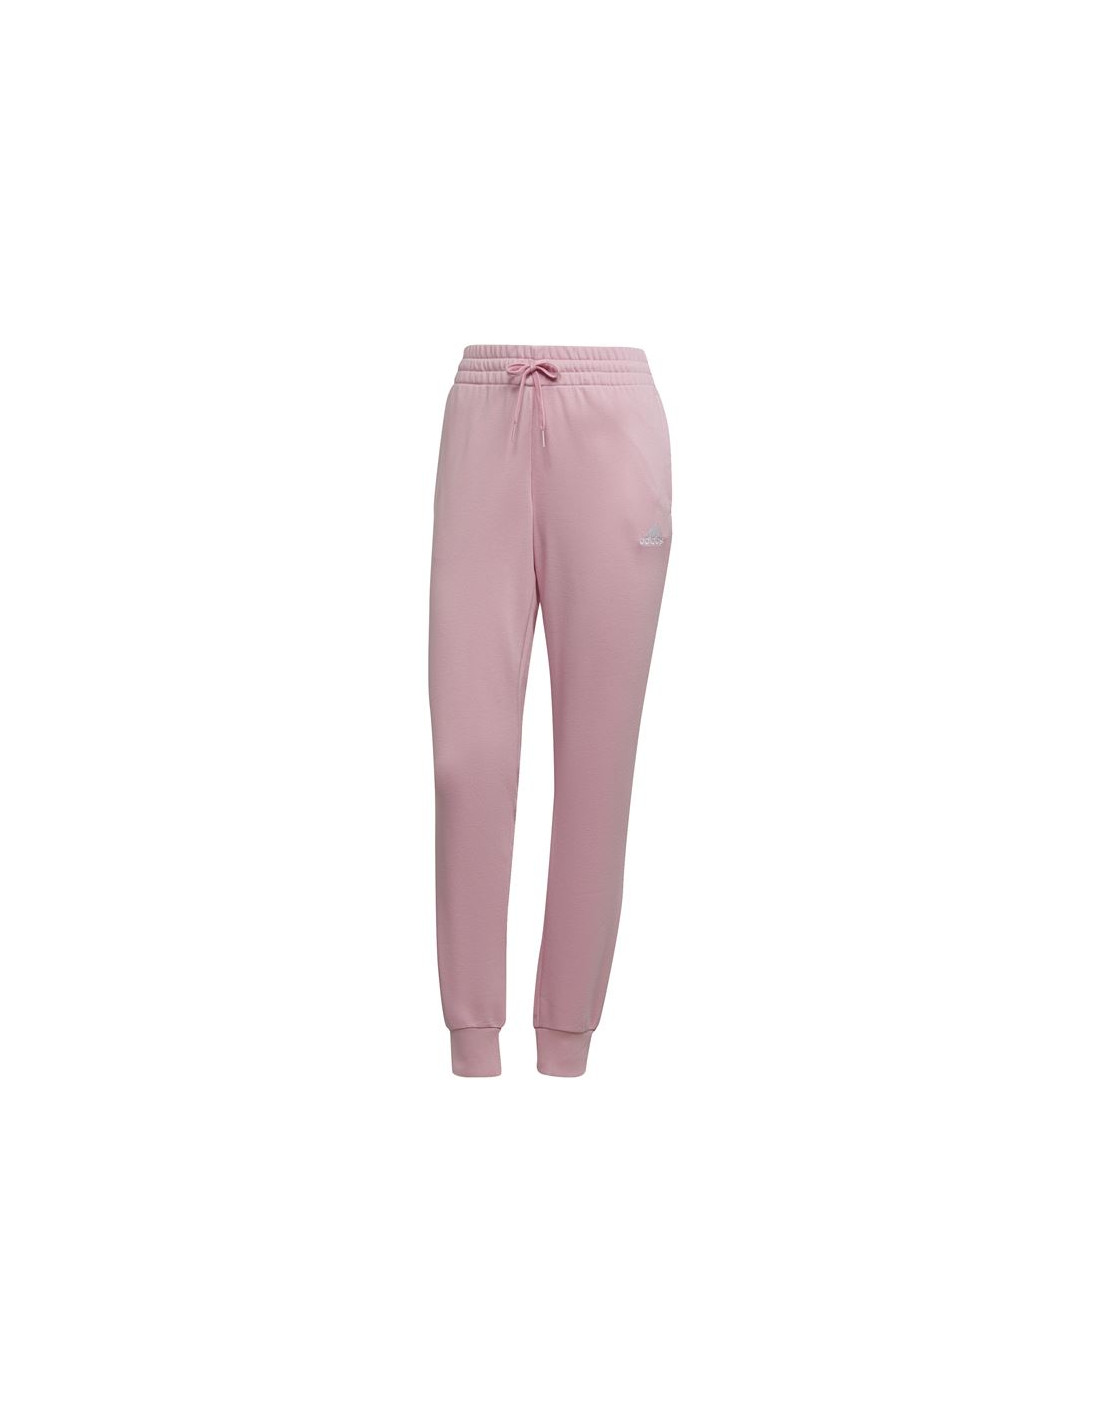 Pantalones adidas essentials french terry mujer pink